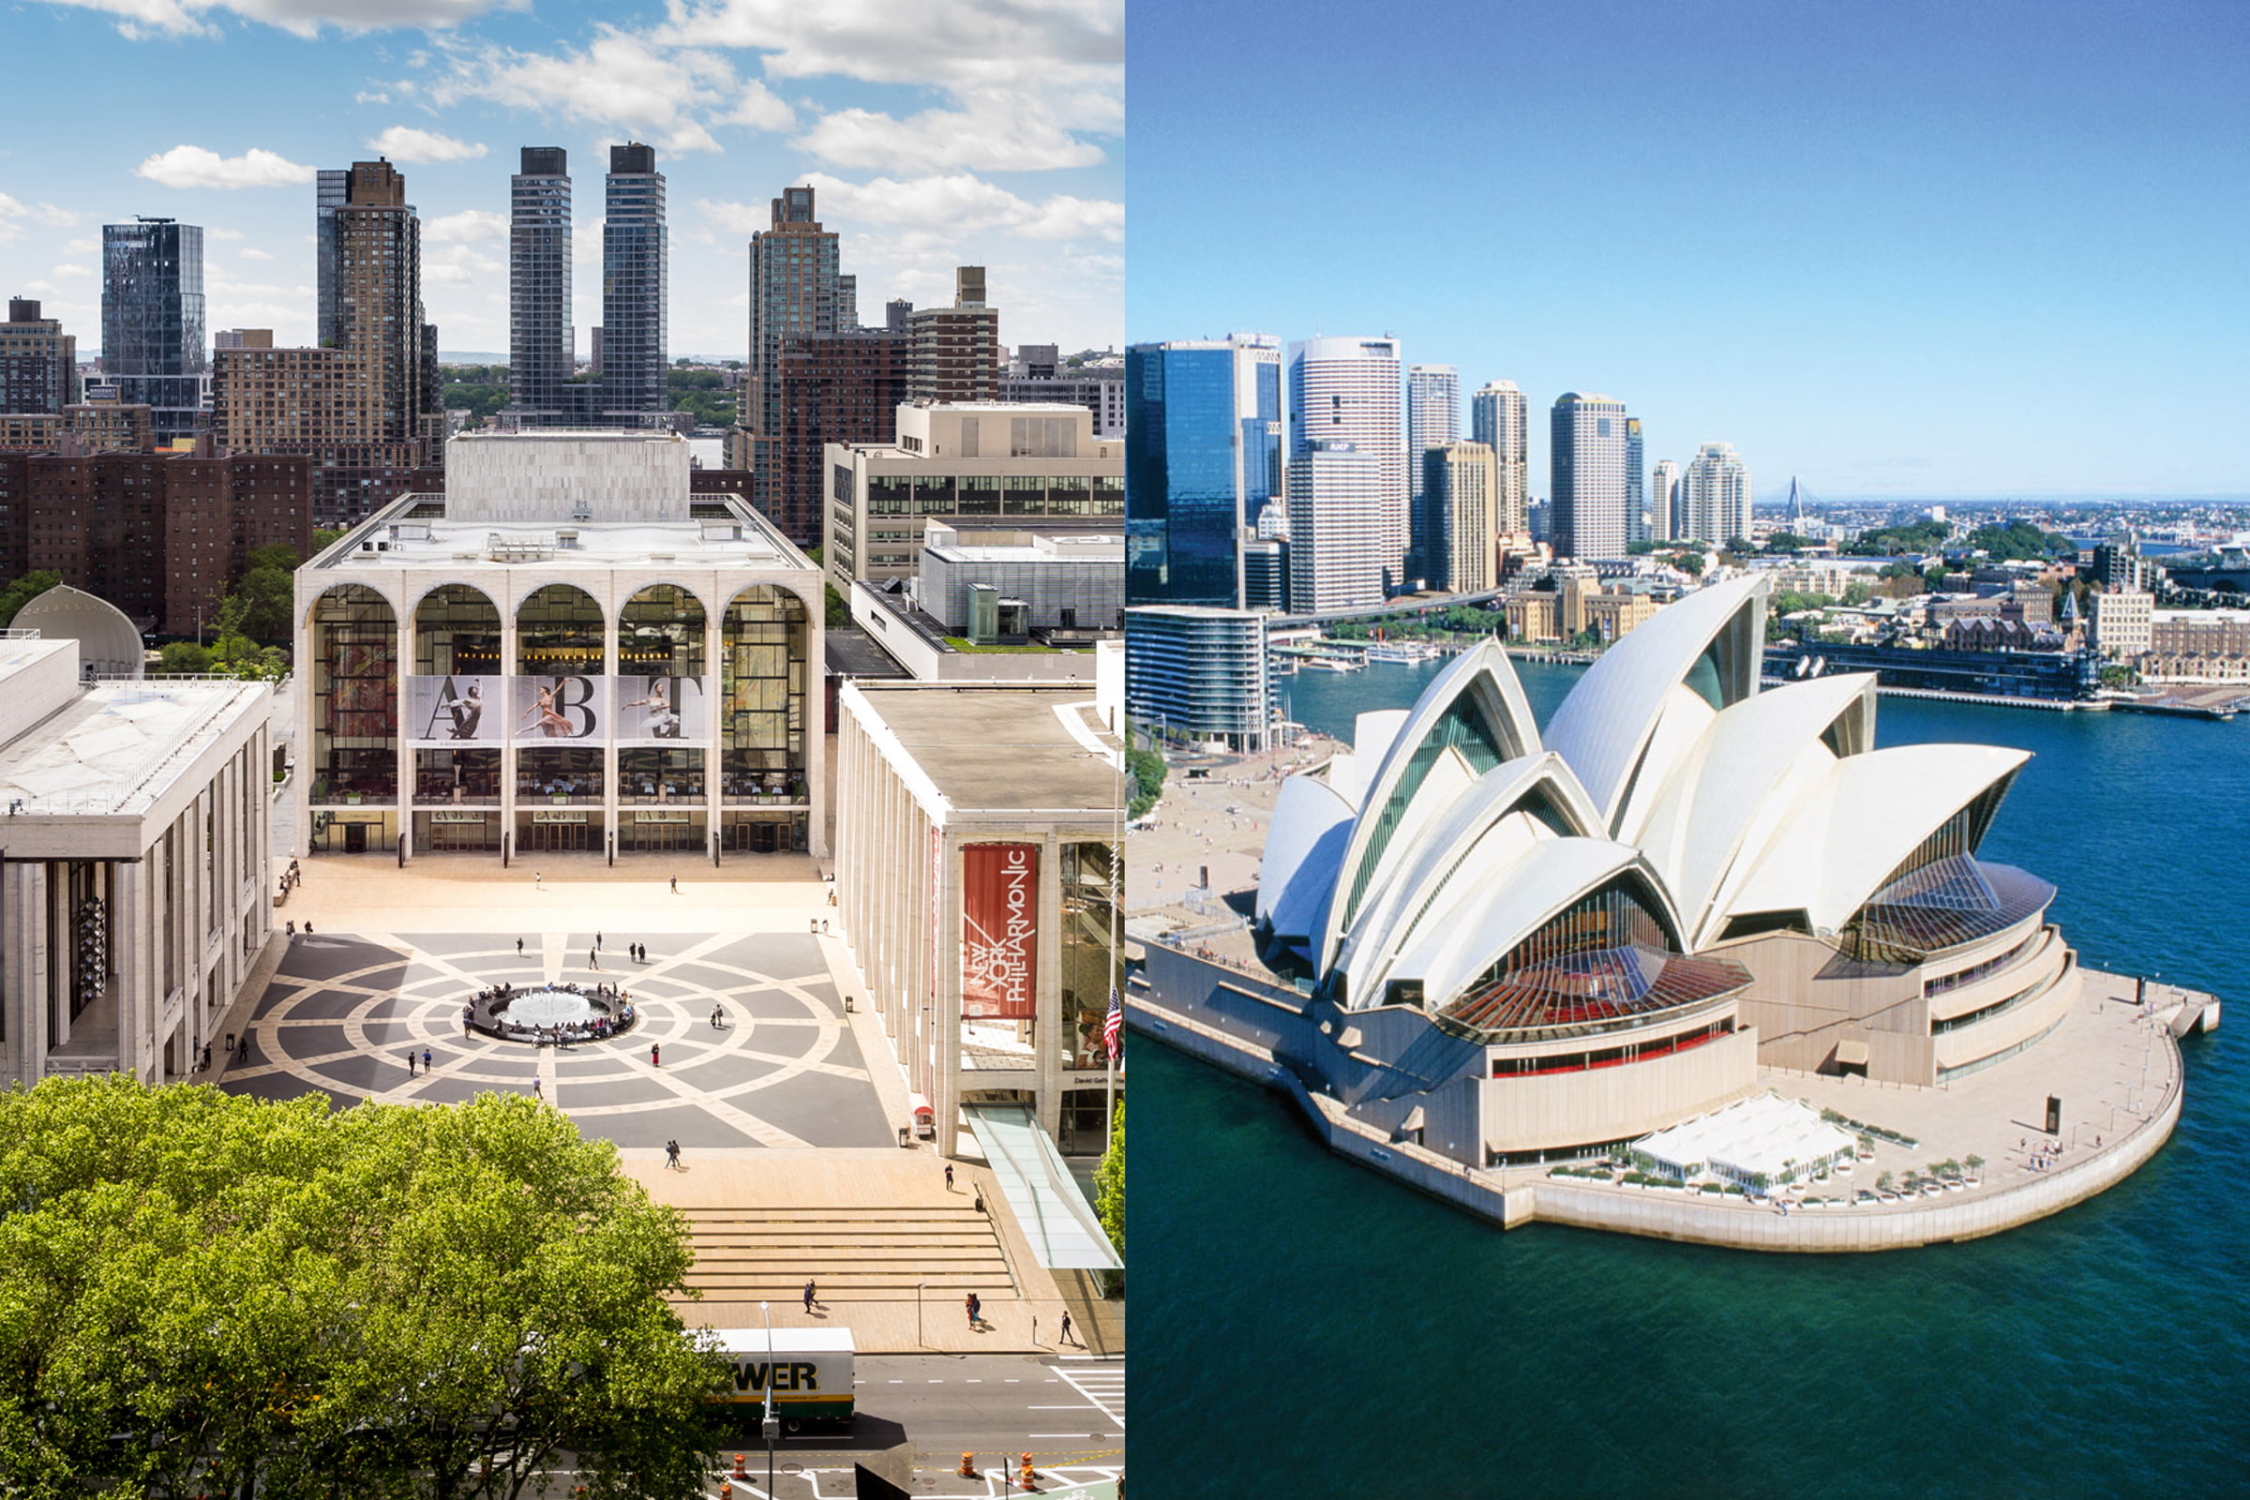 Photographs of the Lincoln Center and Sydney Opera House.